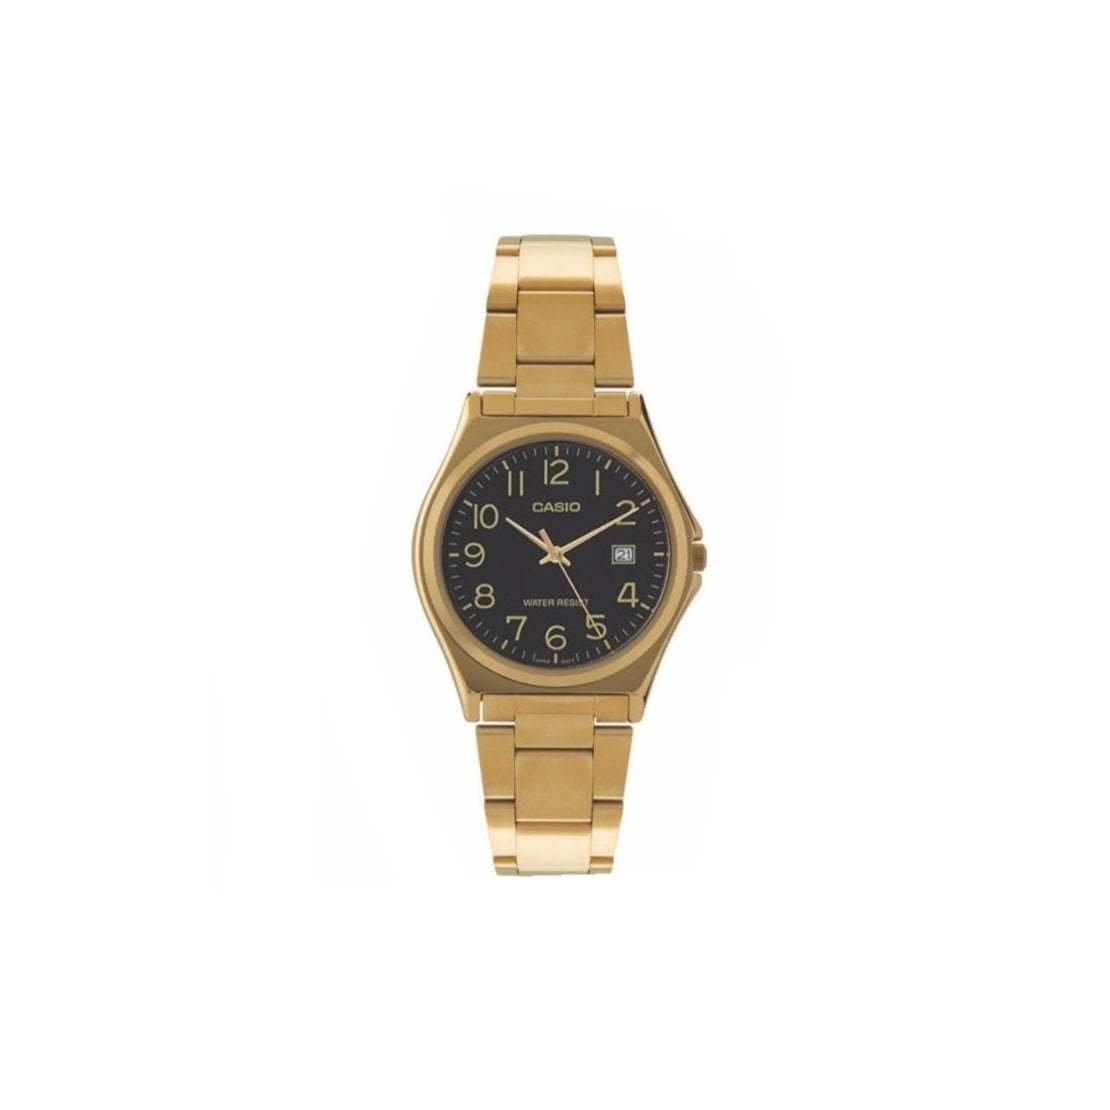 Casio Men's Gold-Tone Stainless-Steel Quartz Watch with Black Dial (9644)